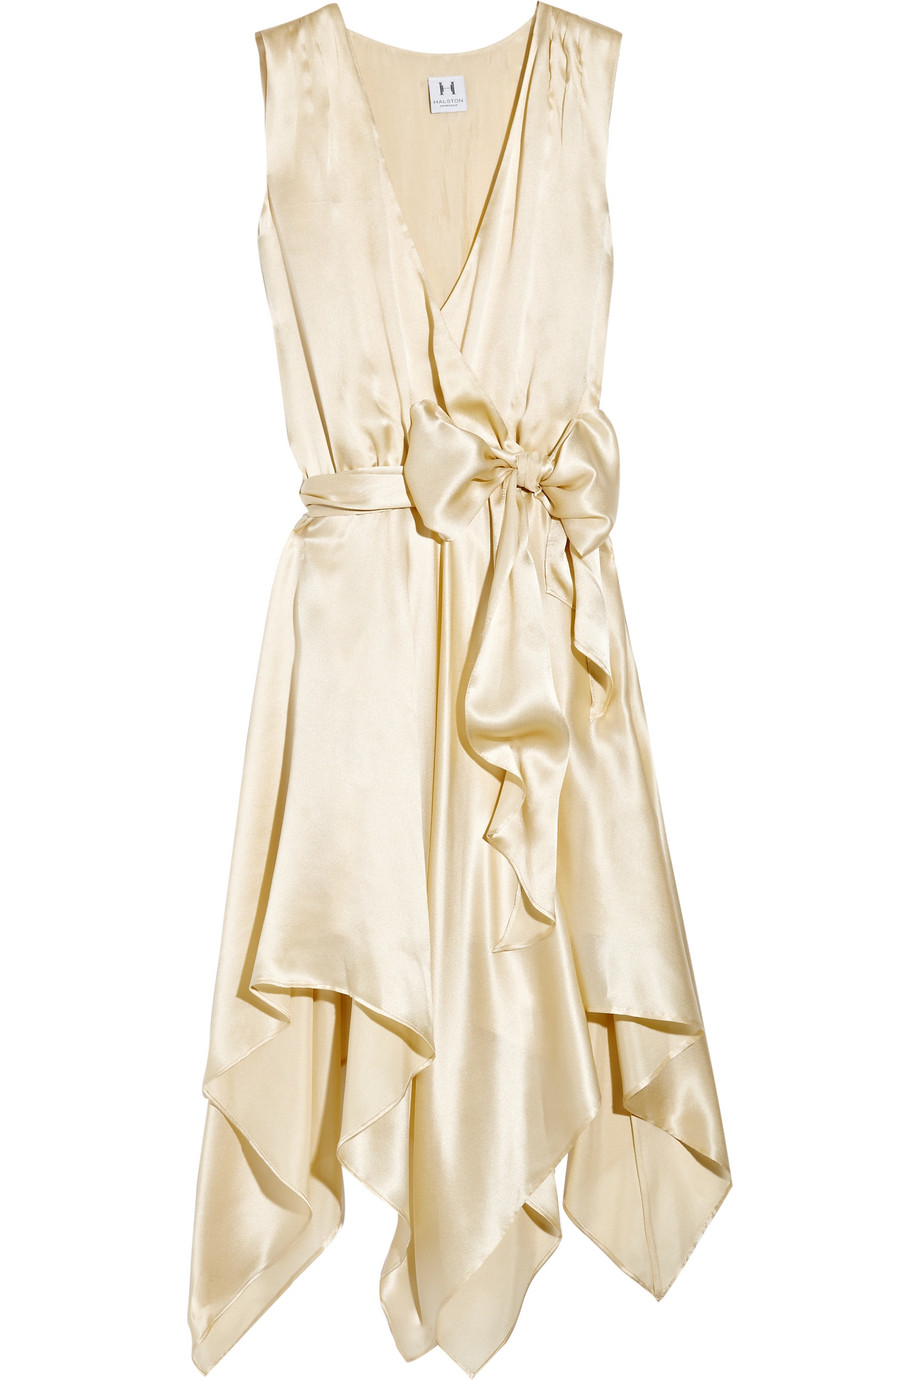 Halston heritage Silk-charmeuse Dress in Gold (champagne) | Lyst